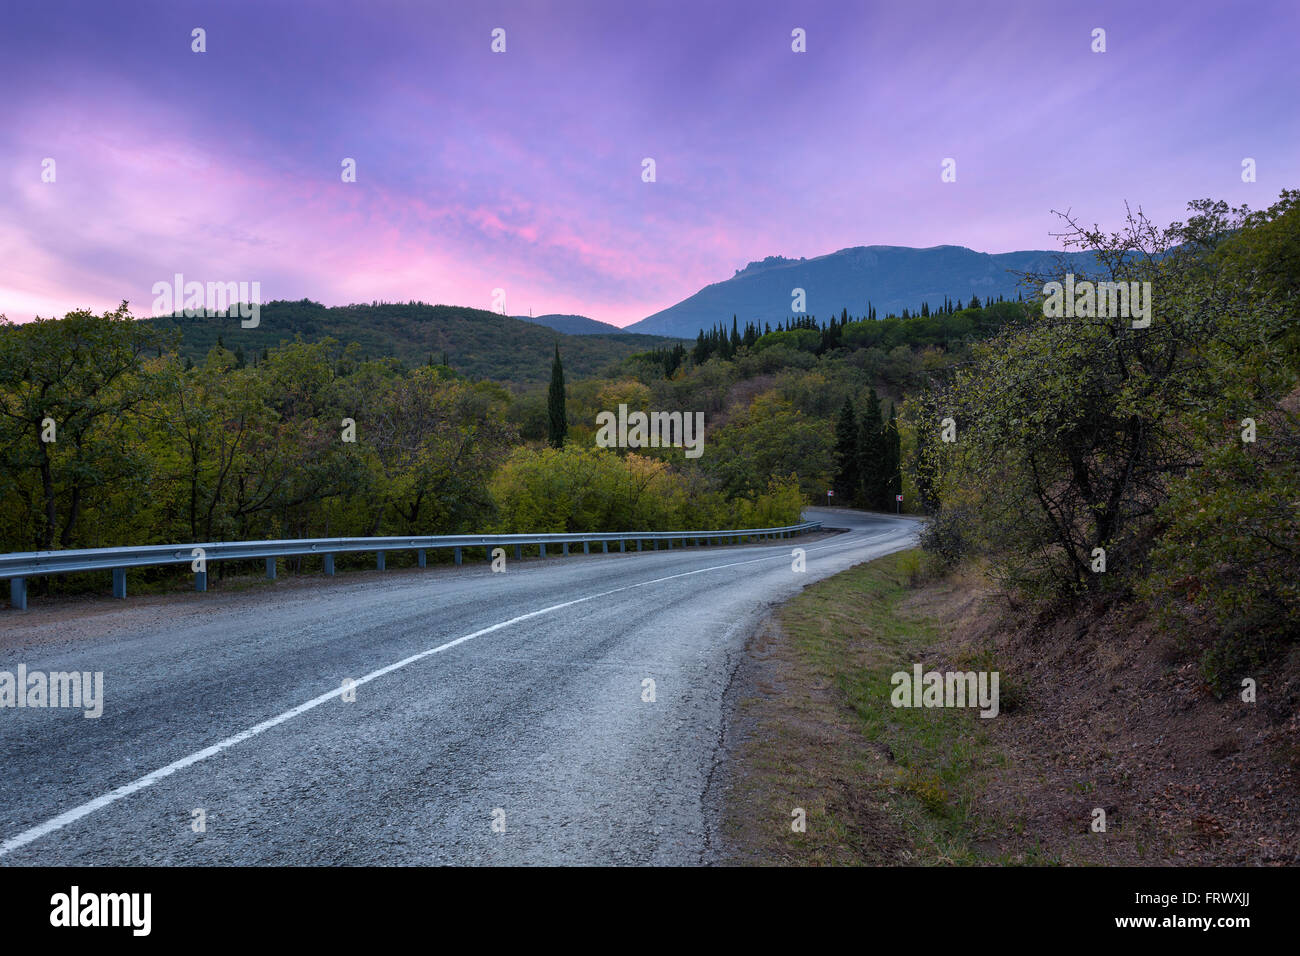 Mountain winding road passing through the forest with colorful sky at sunset in summer Stock Photo